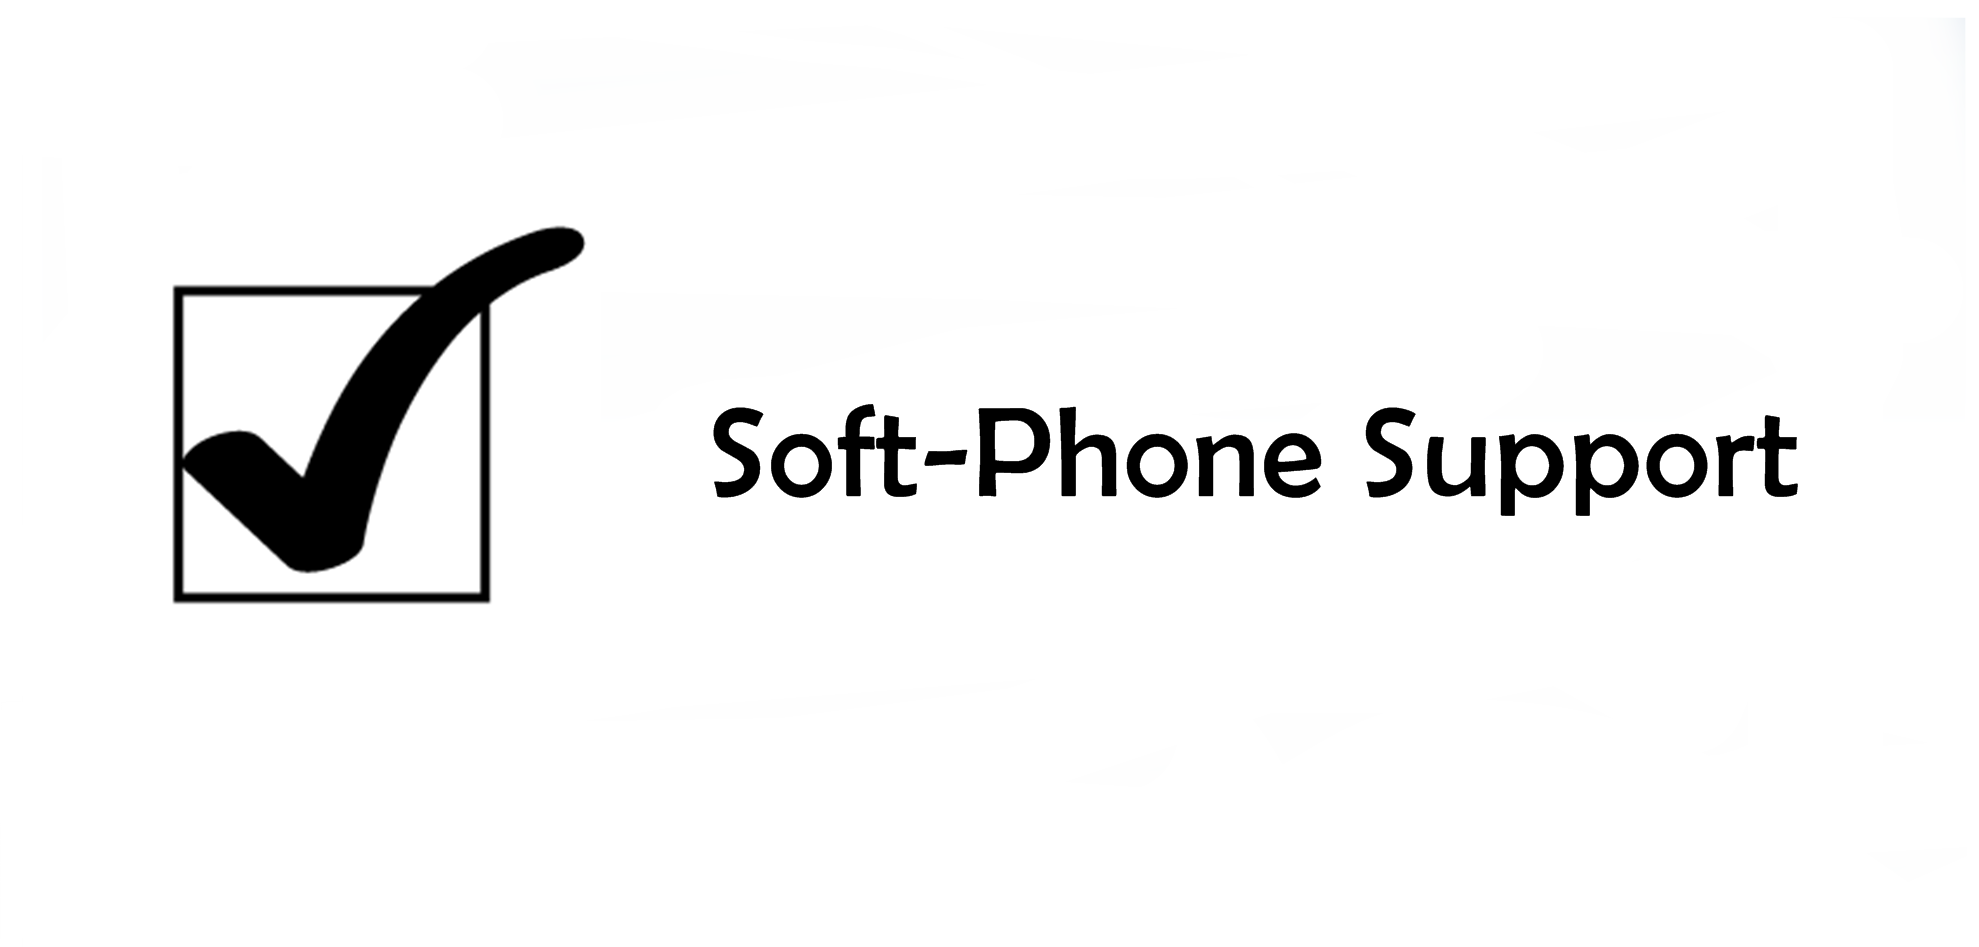 Soft-Phone Support